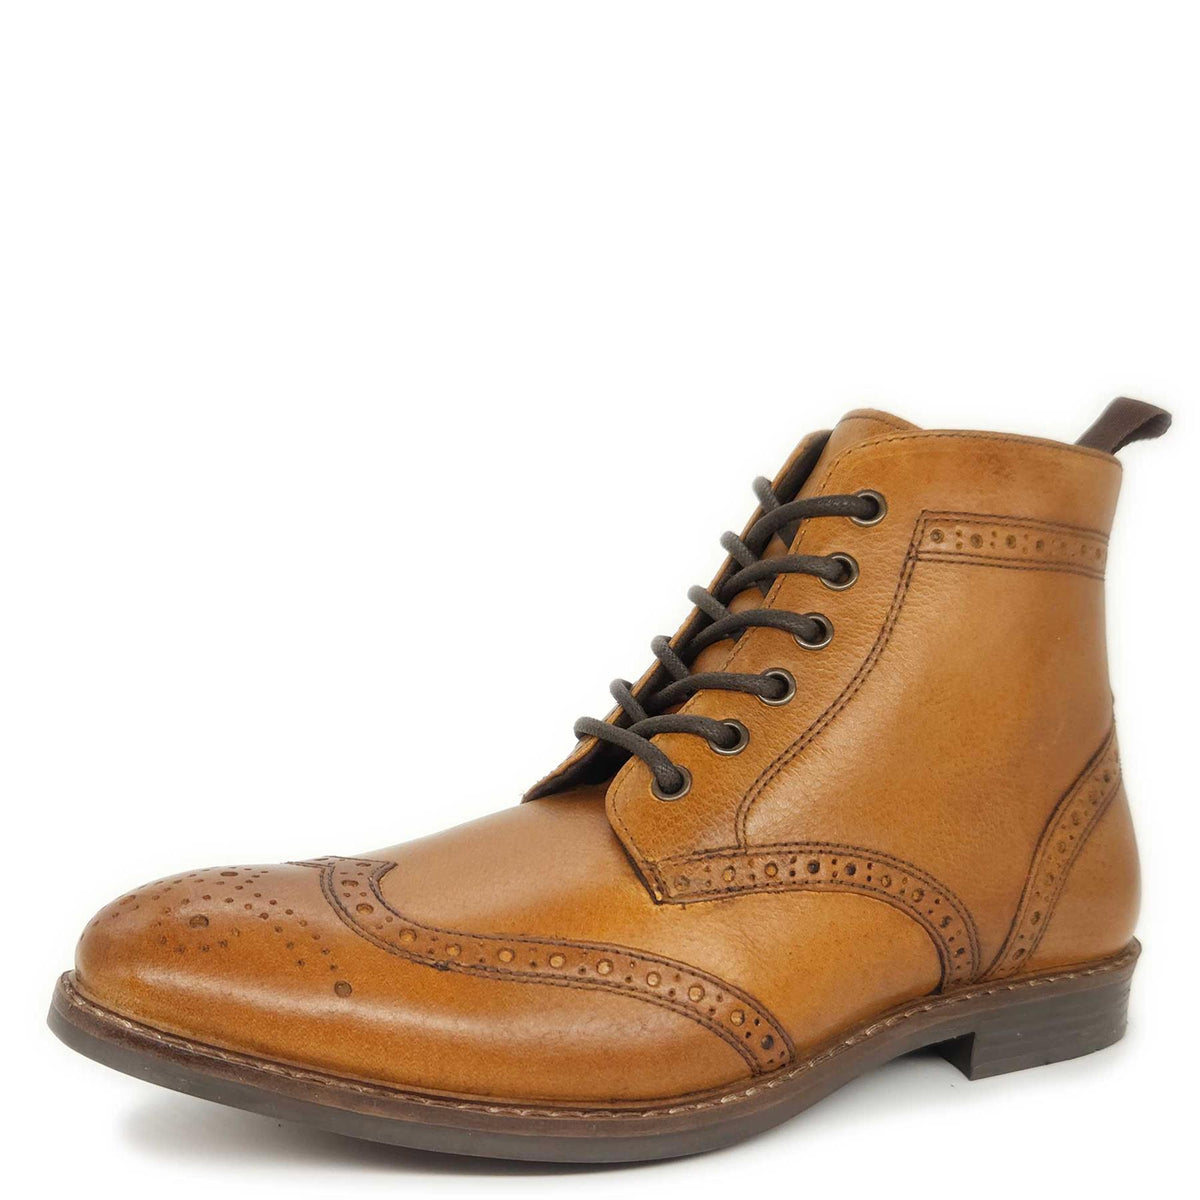 Red Tape Crick Askham Brogue Lace Up Mens Leather Boots